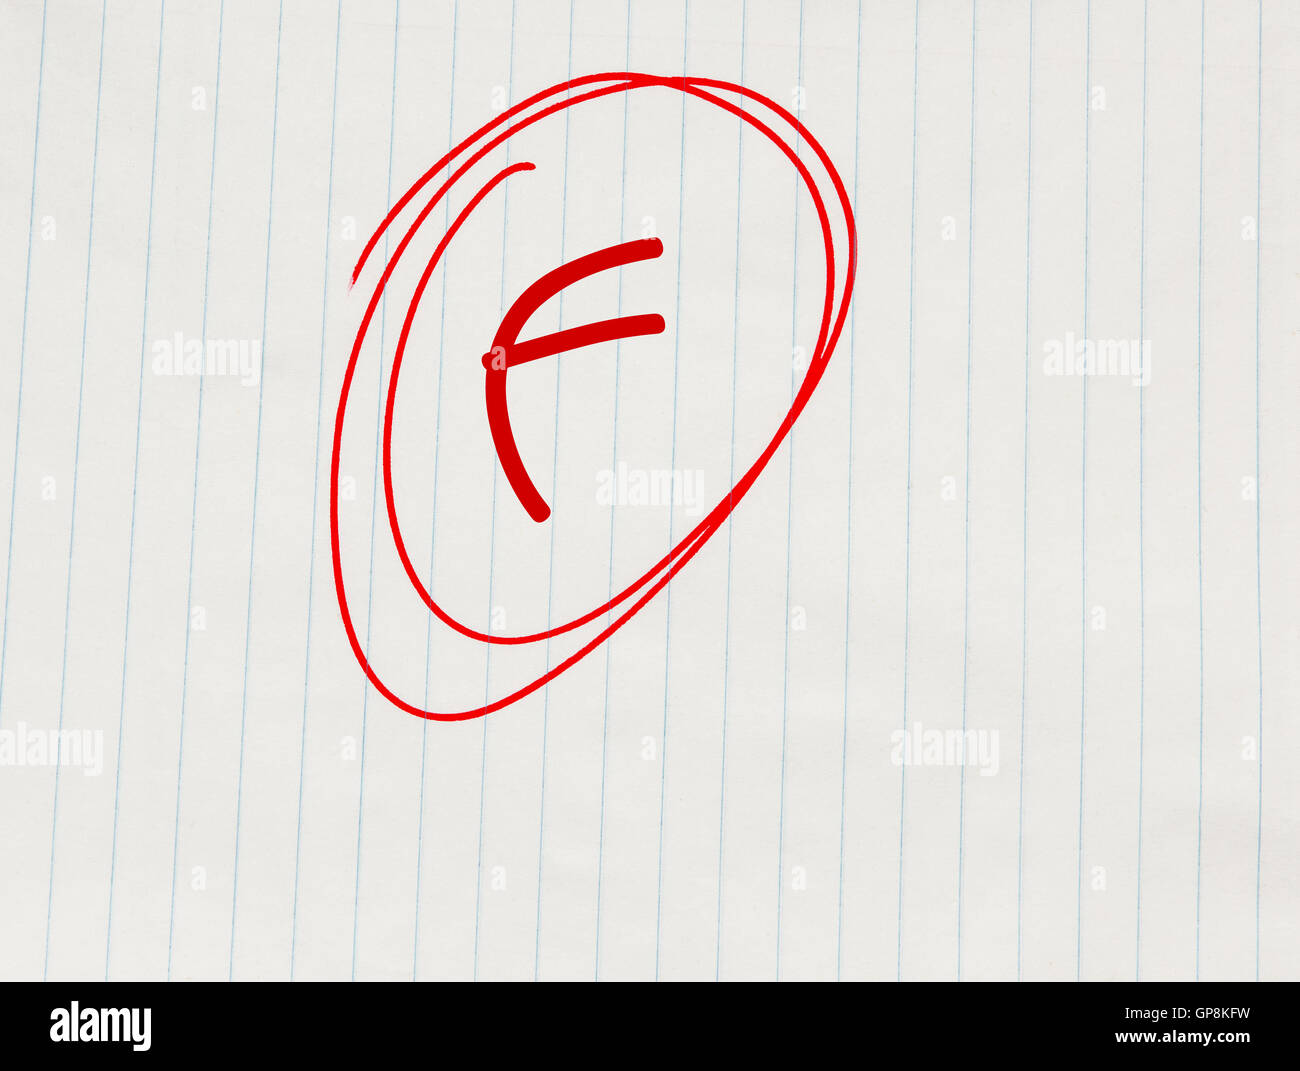 F (failing) grade written in red on notebook paper Stock Photo